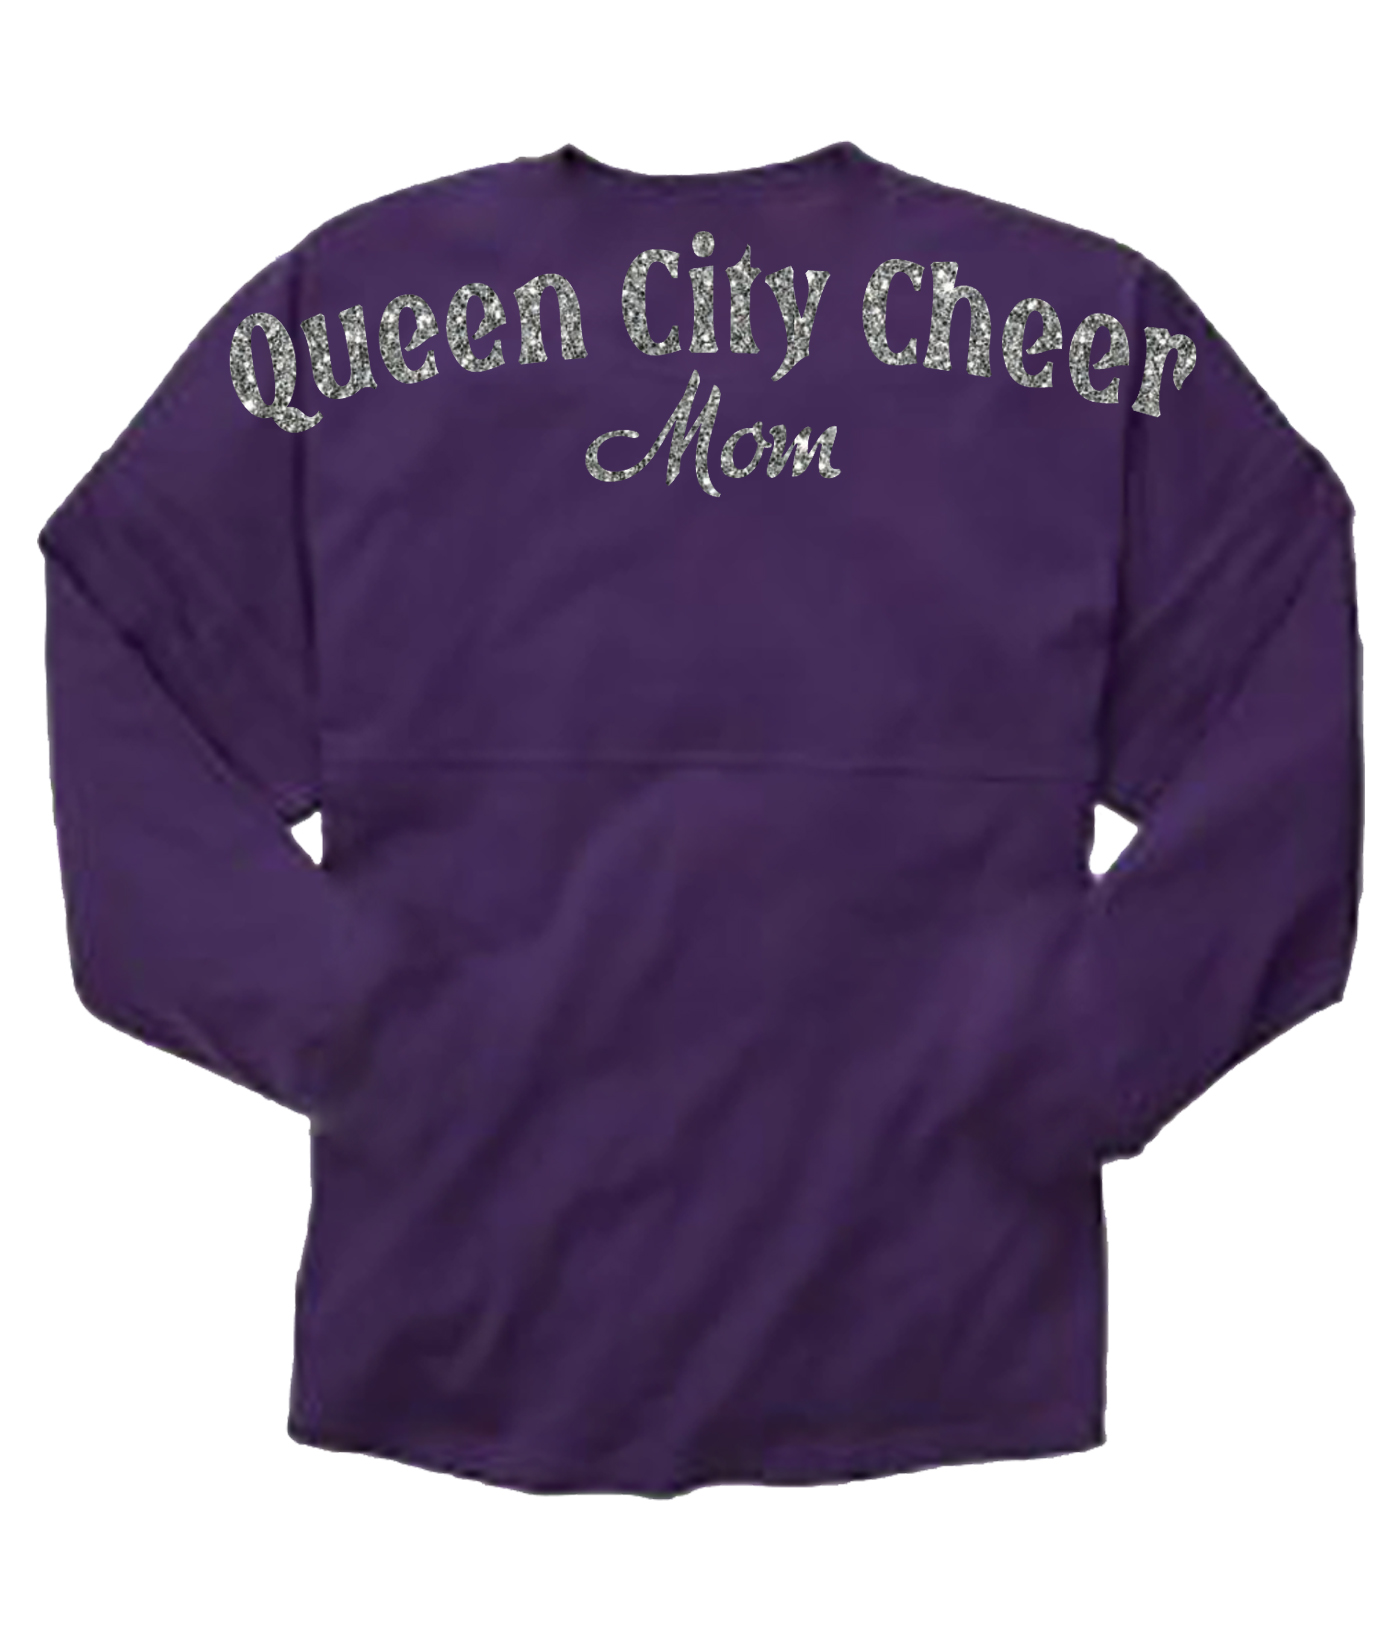 Queen City Cheer Mom Purple Pom Pom Jersey with Silver Glitter